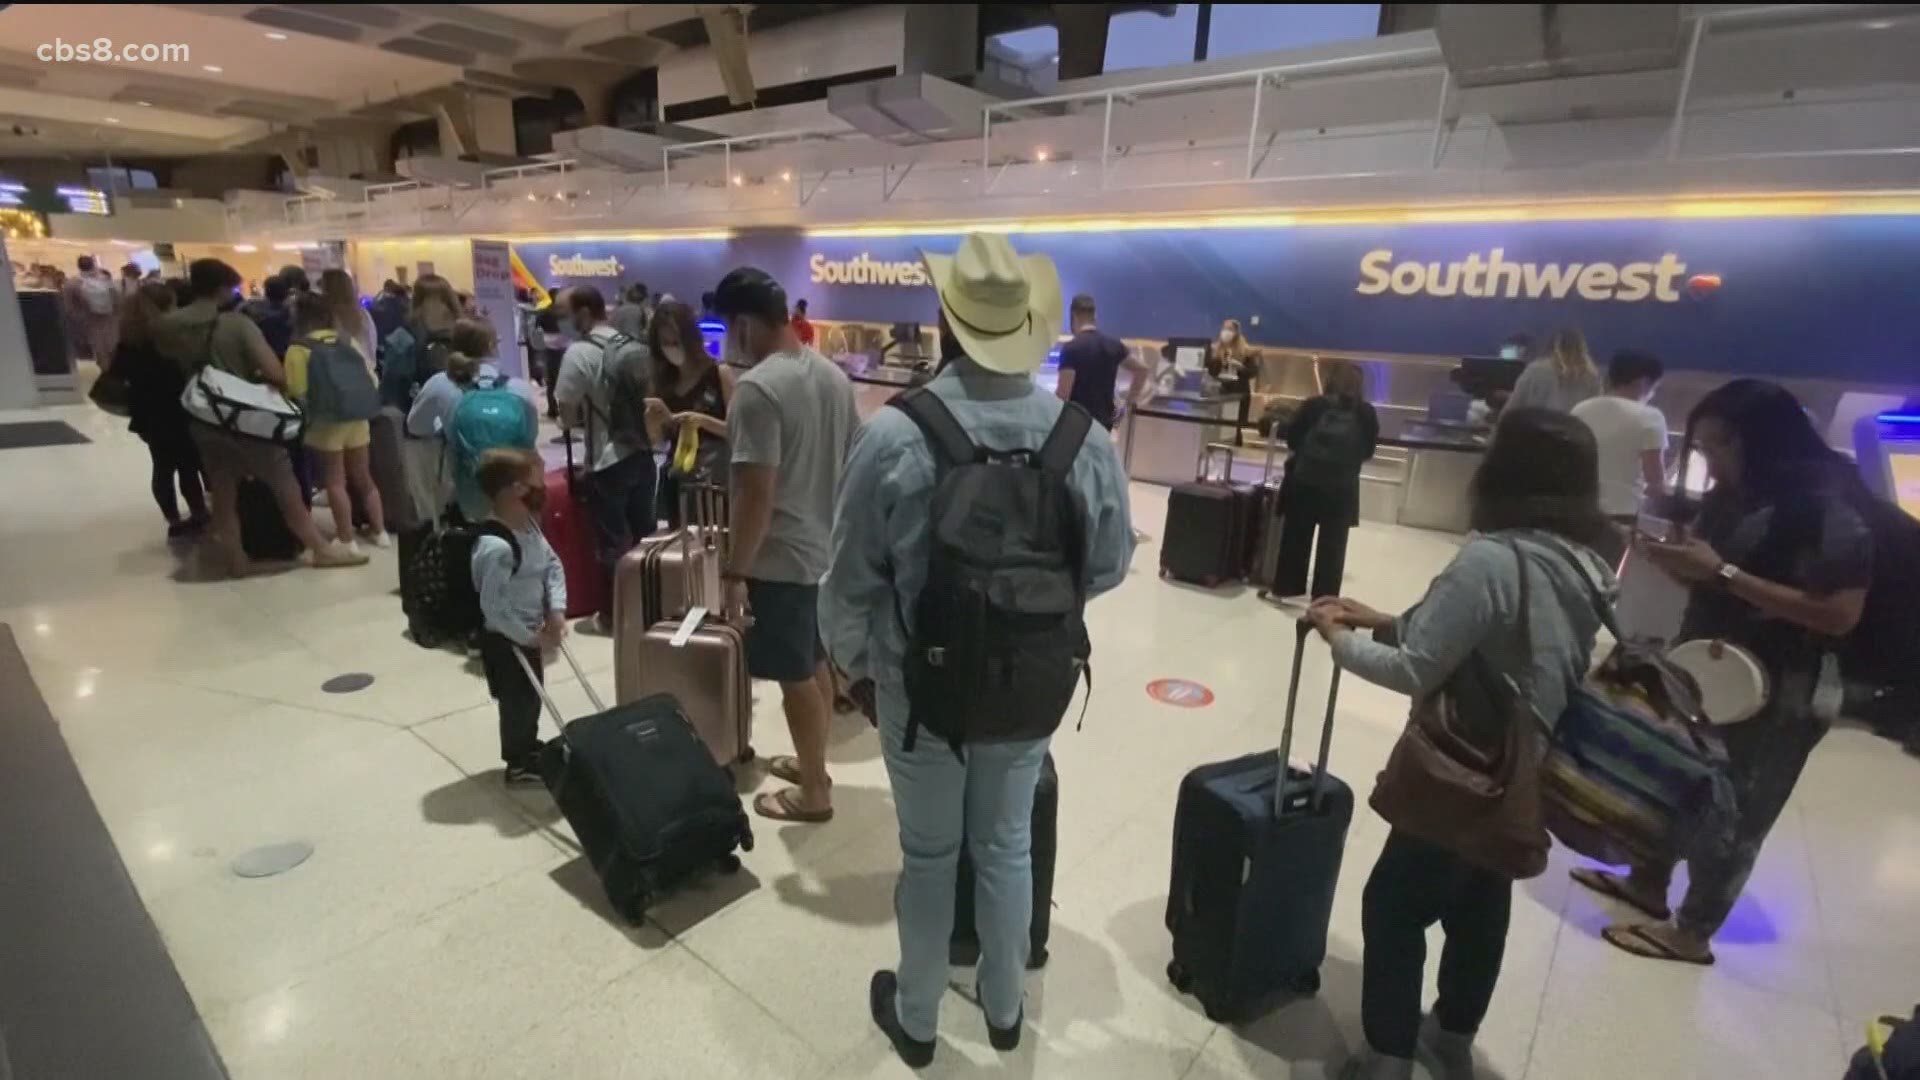 AAA says that more than 37 million people plan to travel for Memorial Day this year.